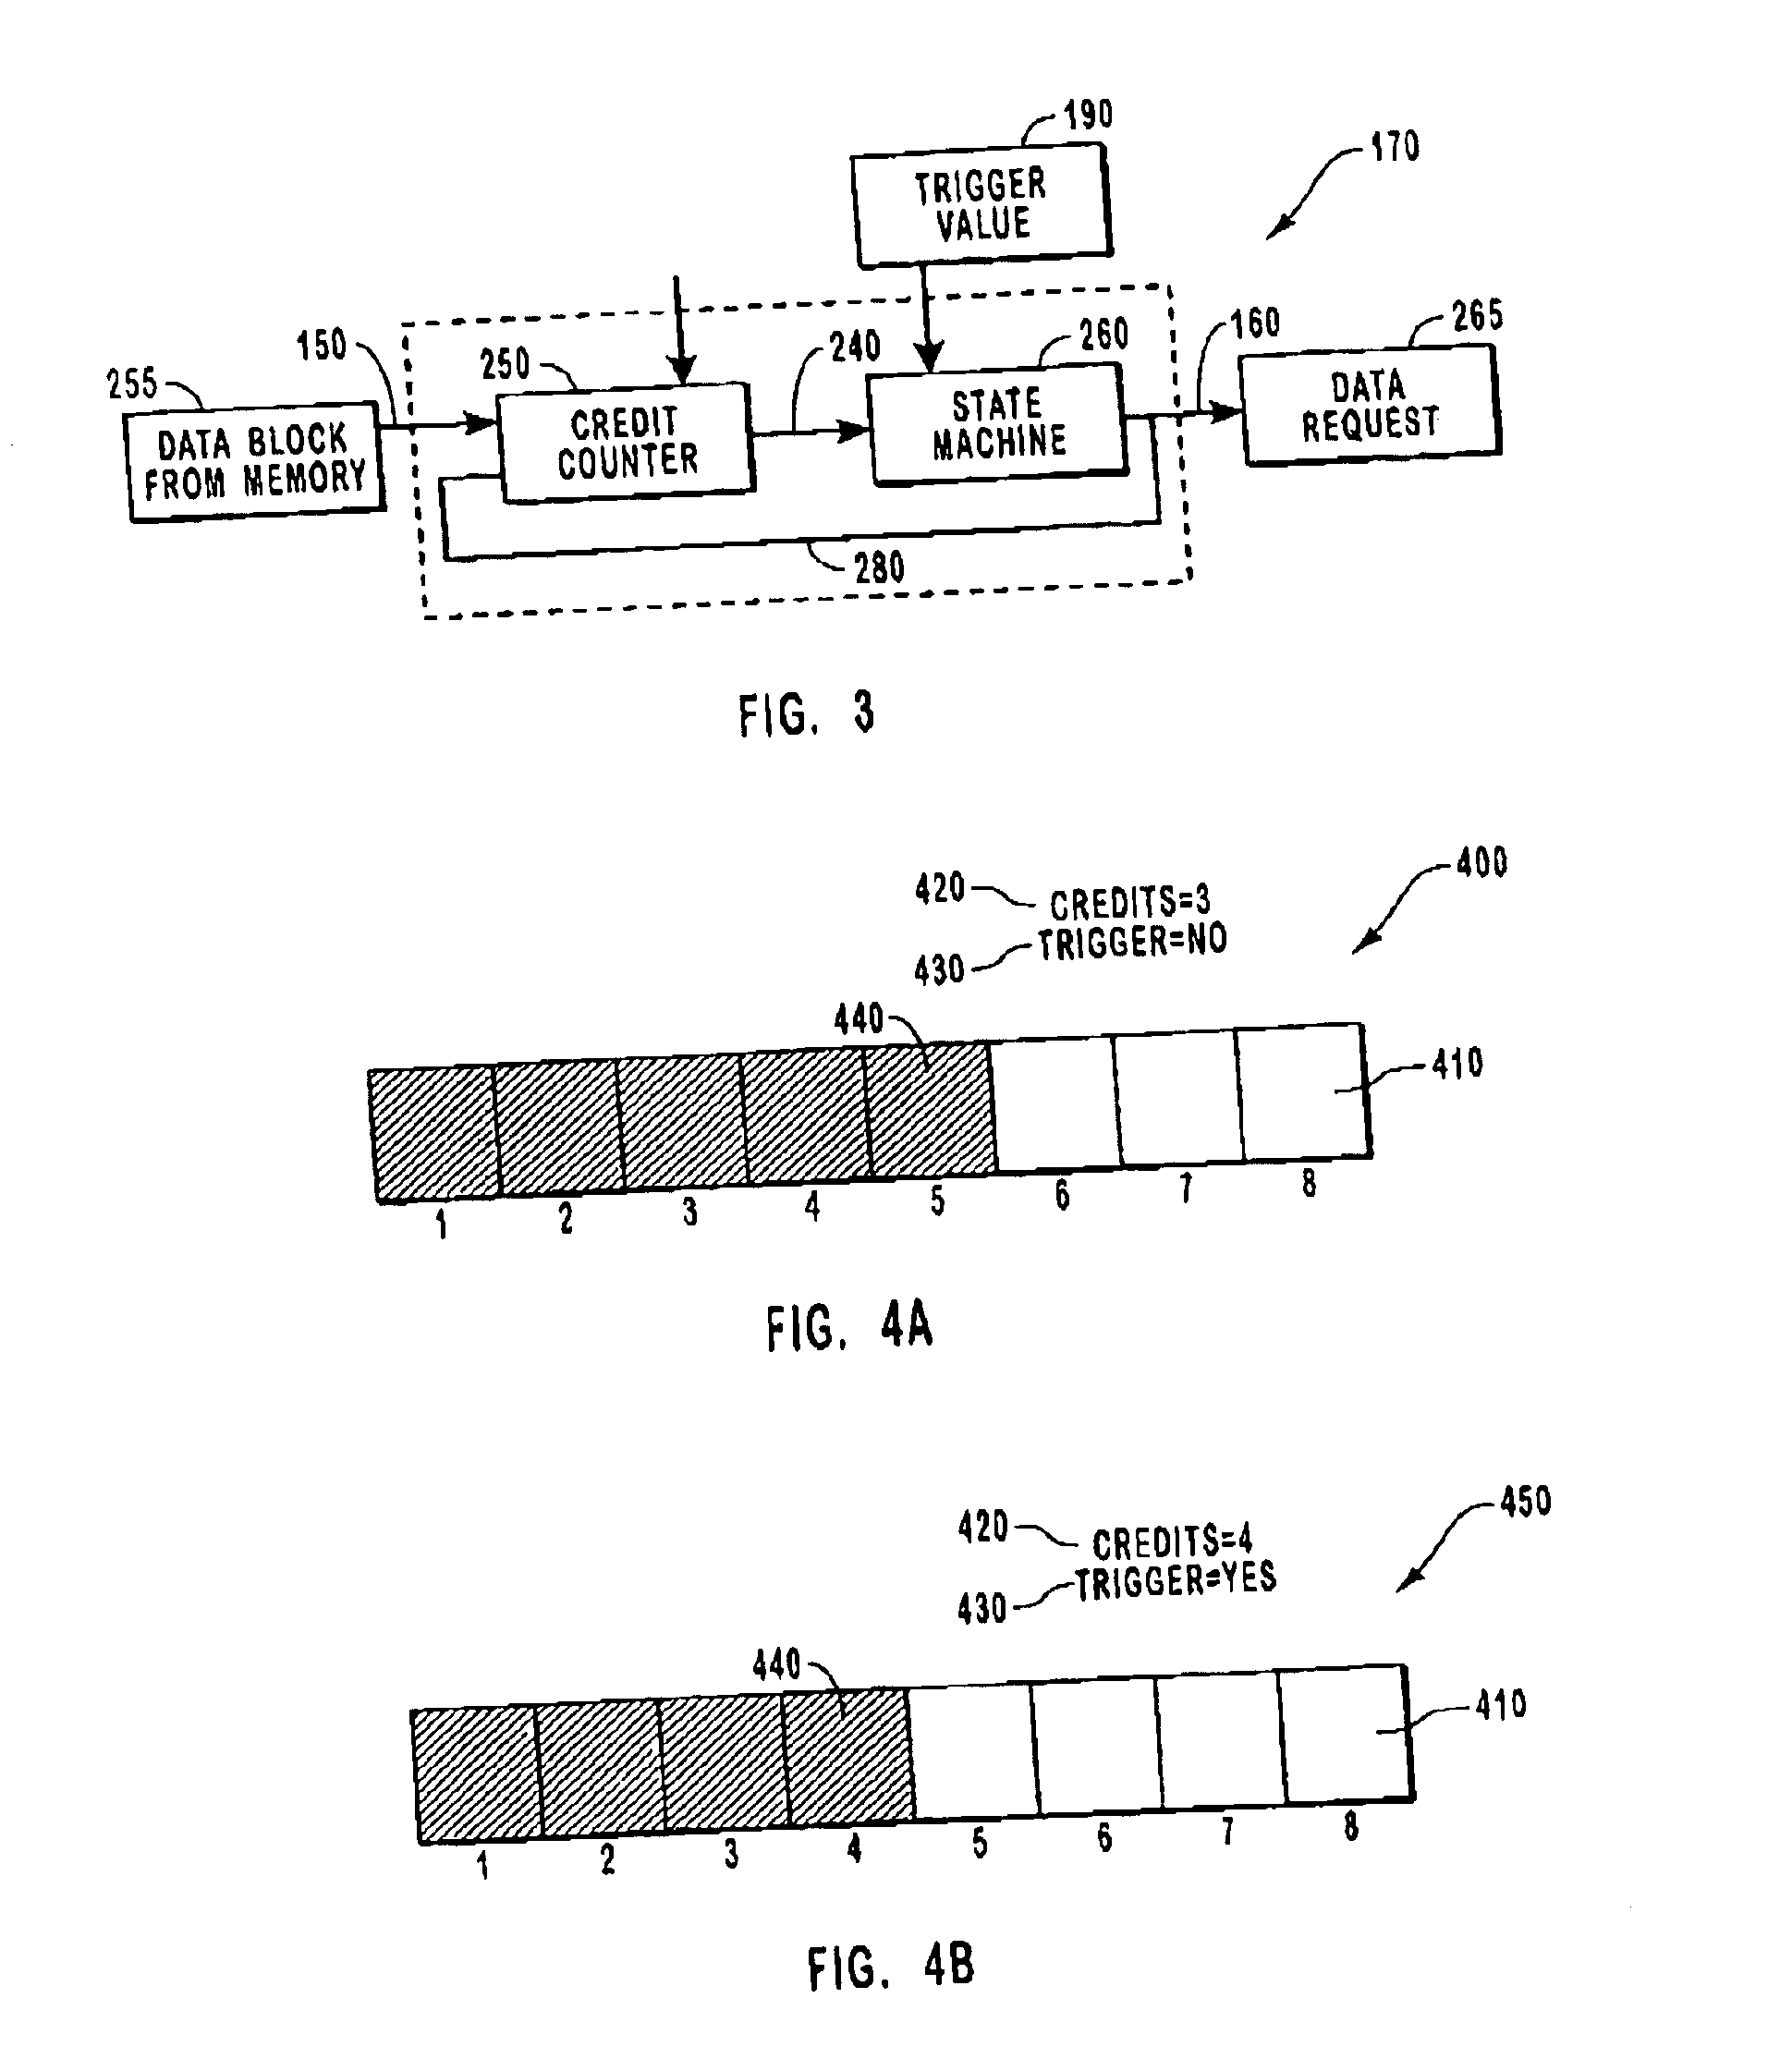 Integrated FIFO memory management control system using a credit value